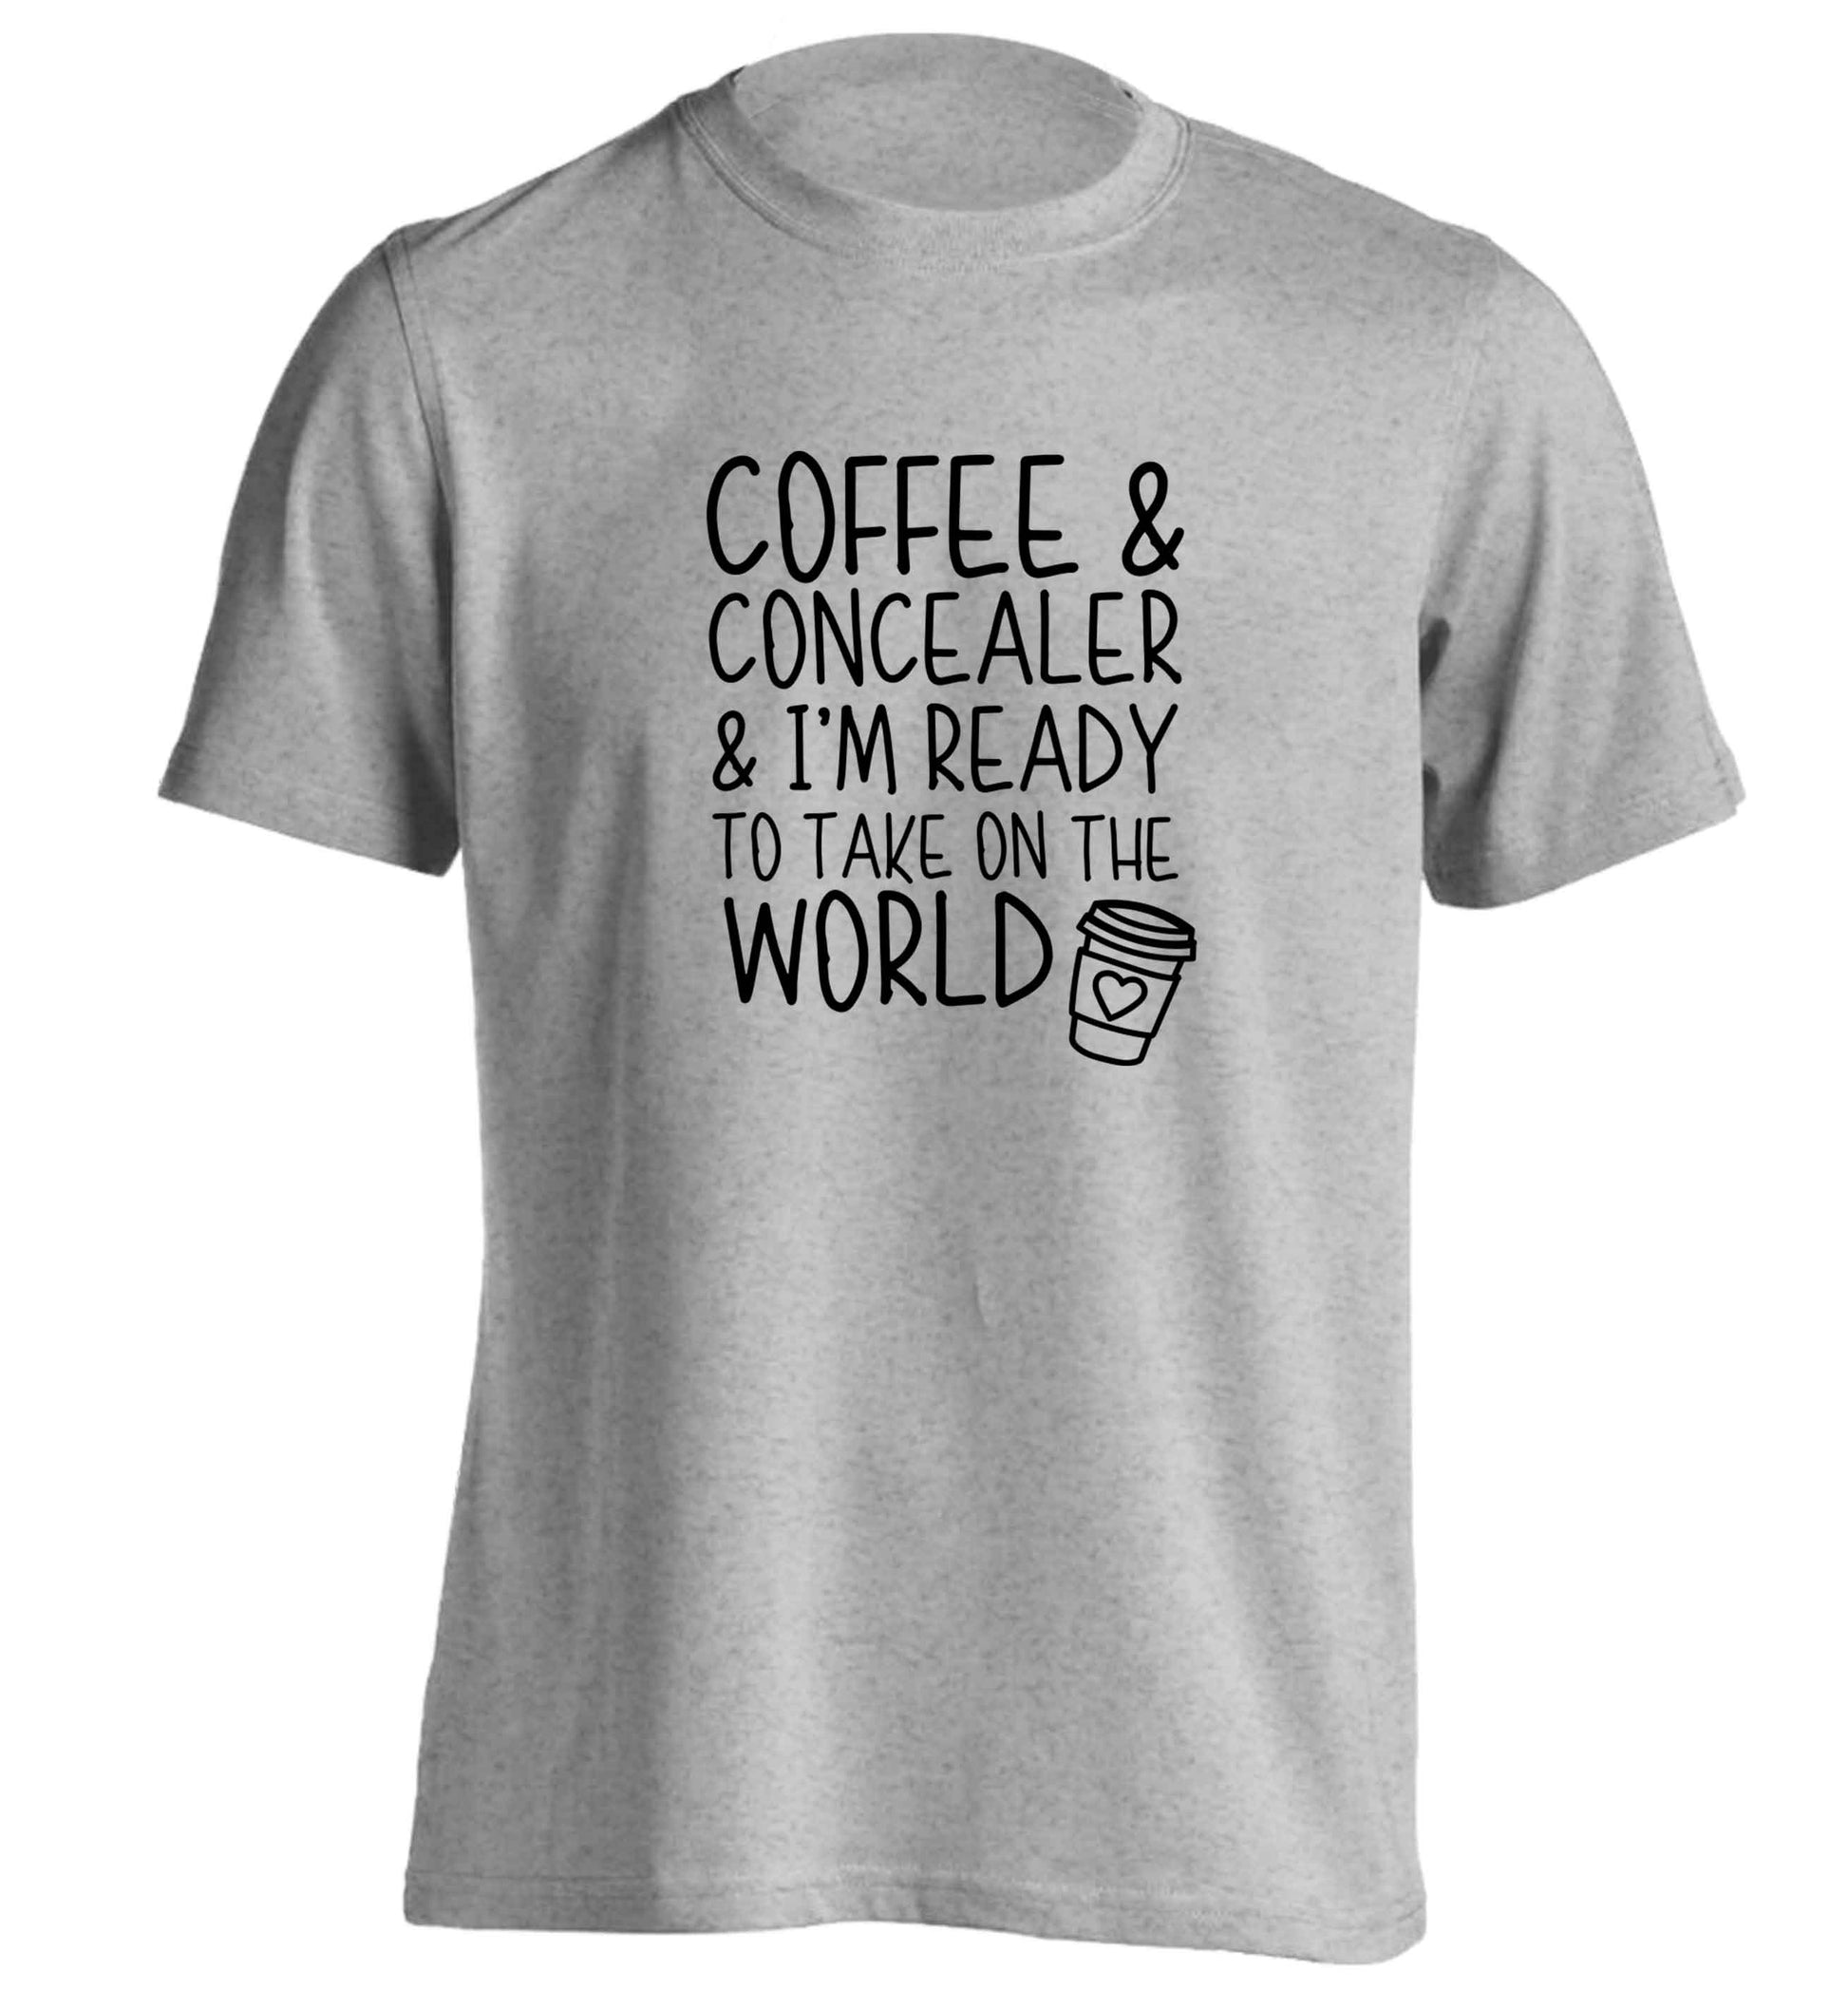 Coffee and concealer and I'm ready to take on the world adults unisex grey Tshirt 2XL